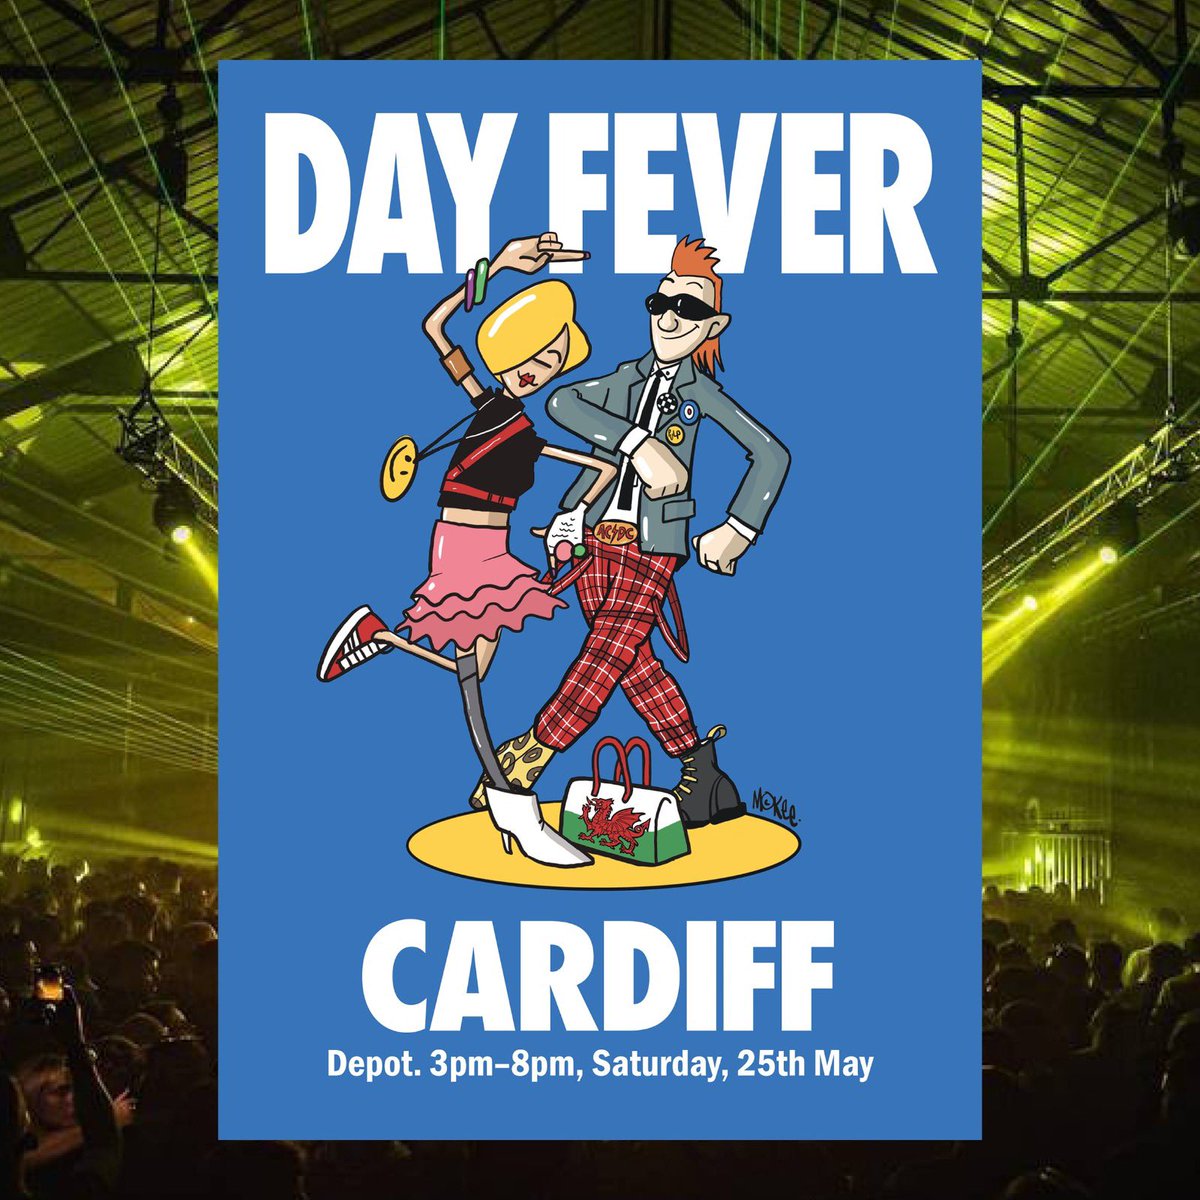 DAY FEVER COMES TO CARDIFF! 🏴󠁧󠁢󠁷󠁬󠁳󠁿 Yes the country’s biggest and most popular day time club is coming to the Welsh Capital. @DayFeverUK 💃🏽 Tickets on sale tomorrow, 10am via - depotcardiff.com